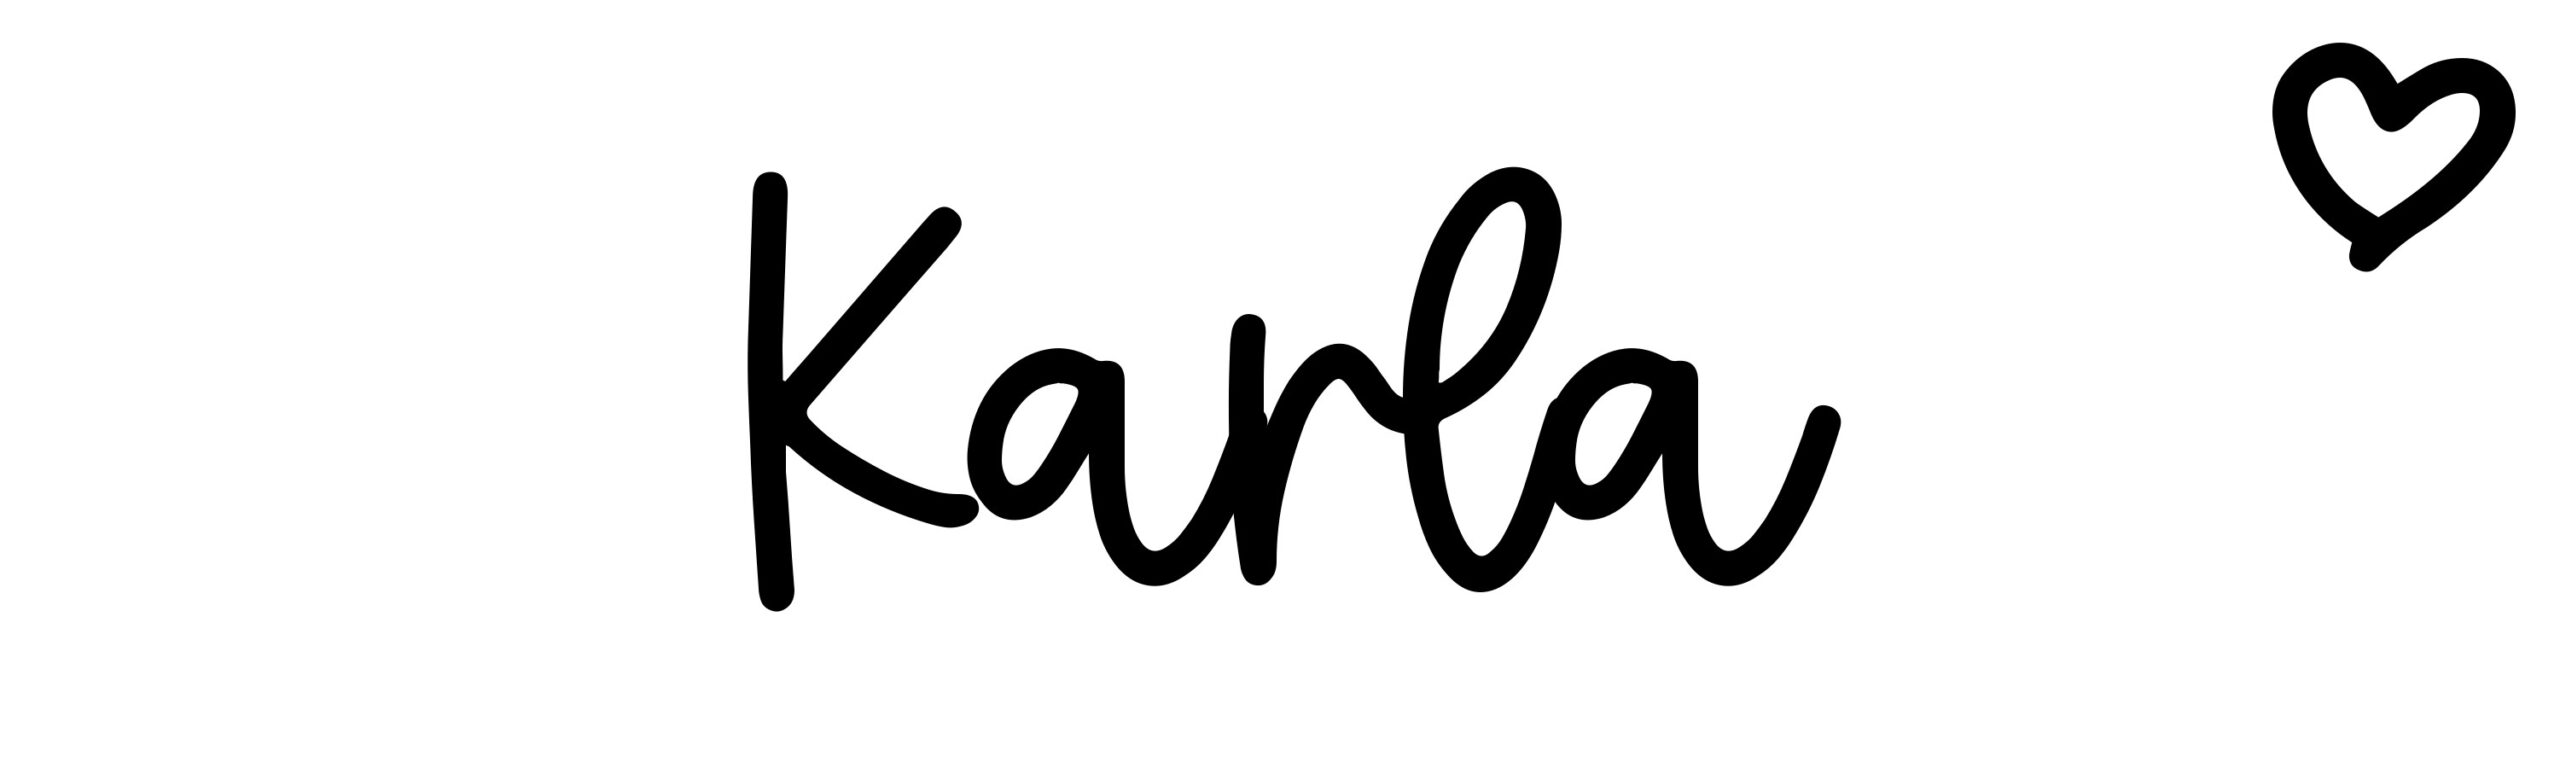 Karla - Name meaning, origin, variations and more